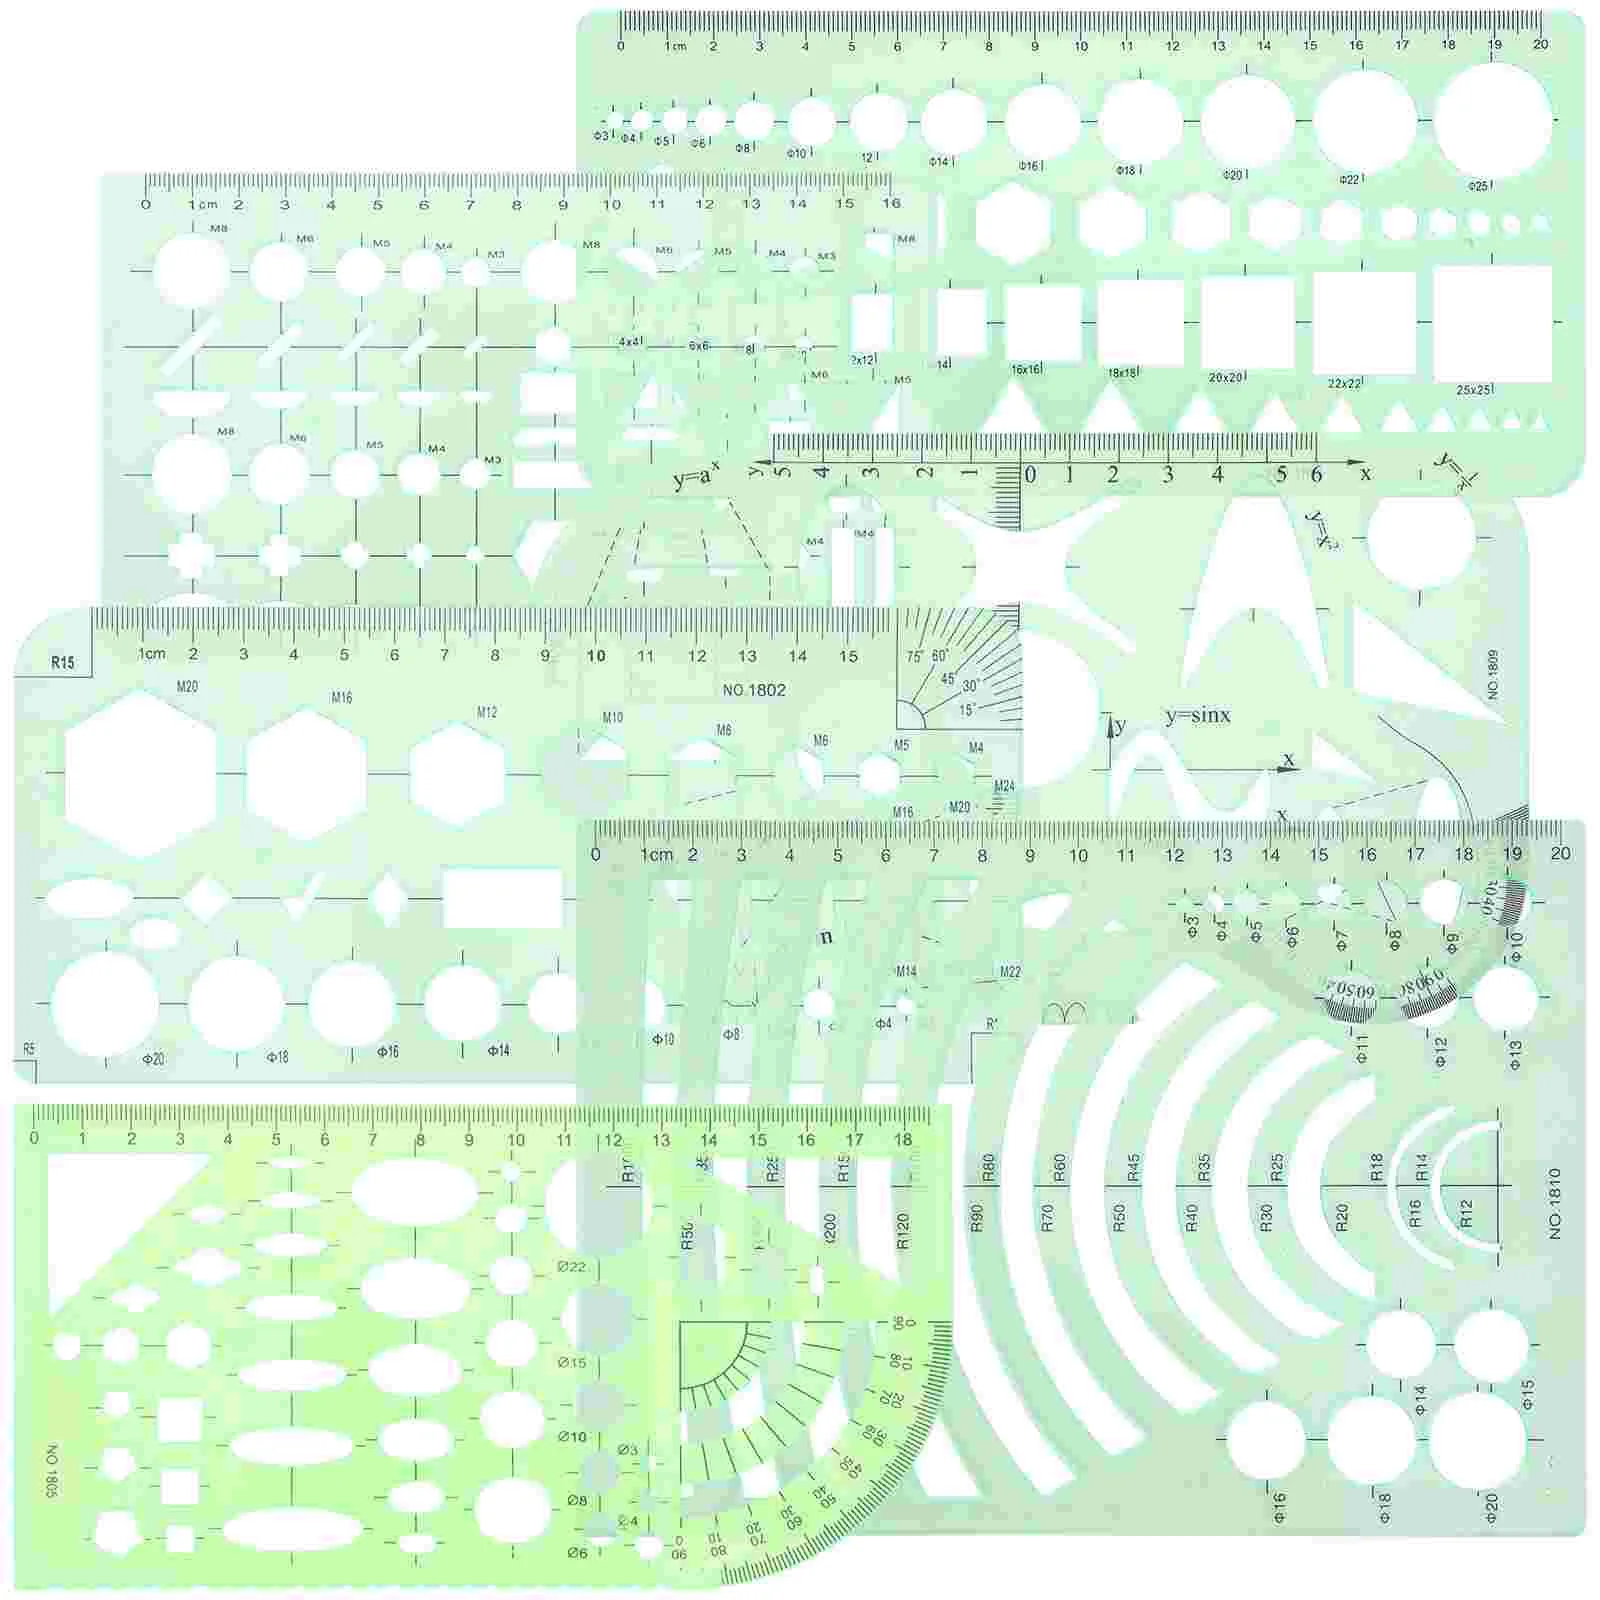 

Drawing Template Ruler Architecture Supplies Circle Templates Drafting Plastic Scale Stencils Geometric Geometry Kids Suit Case